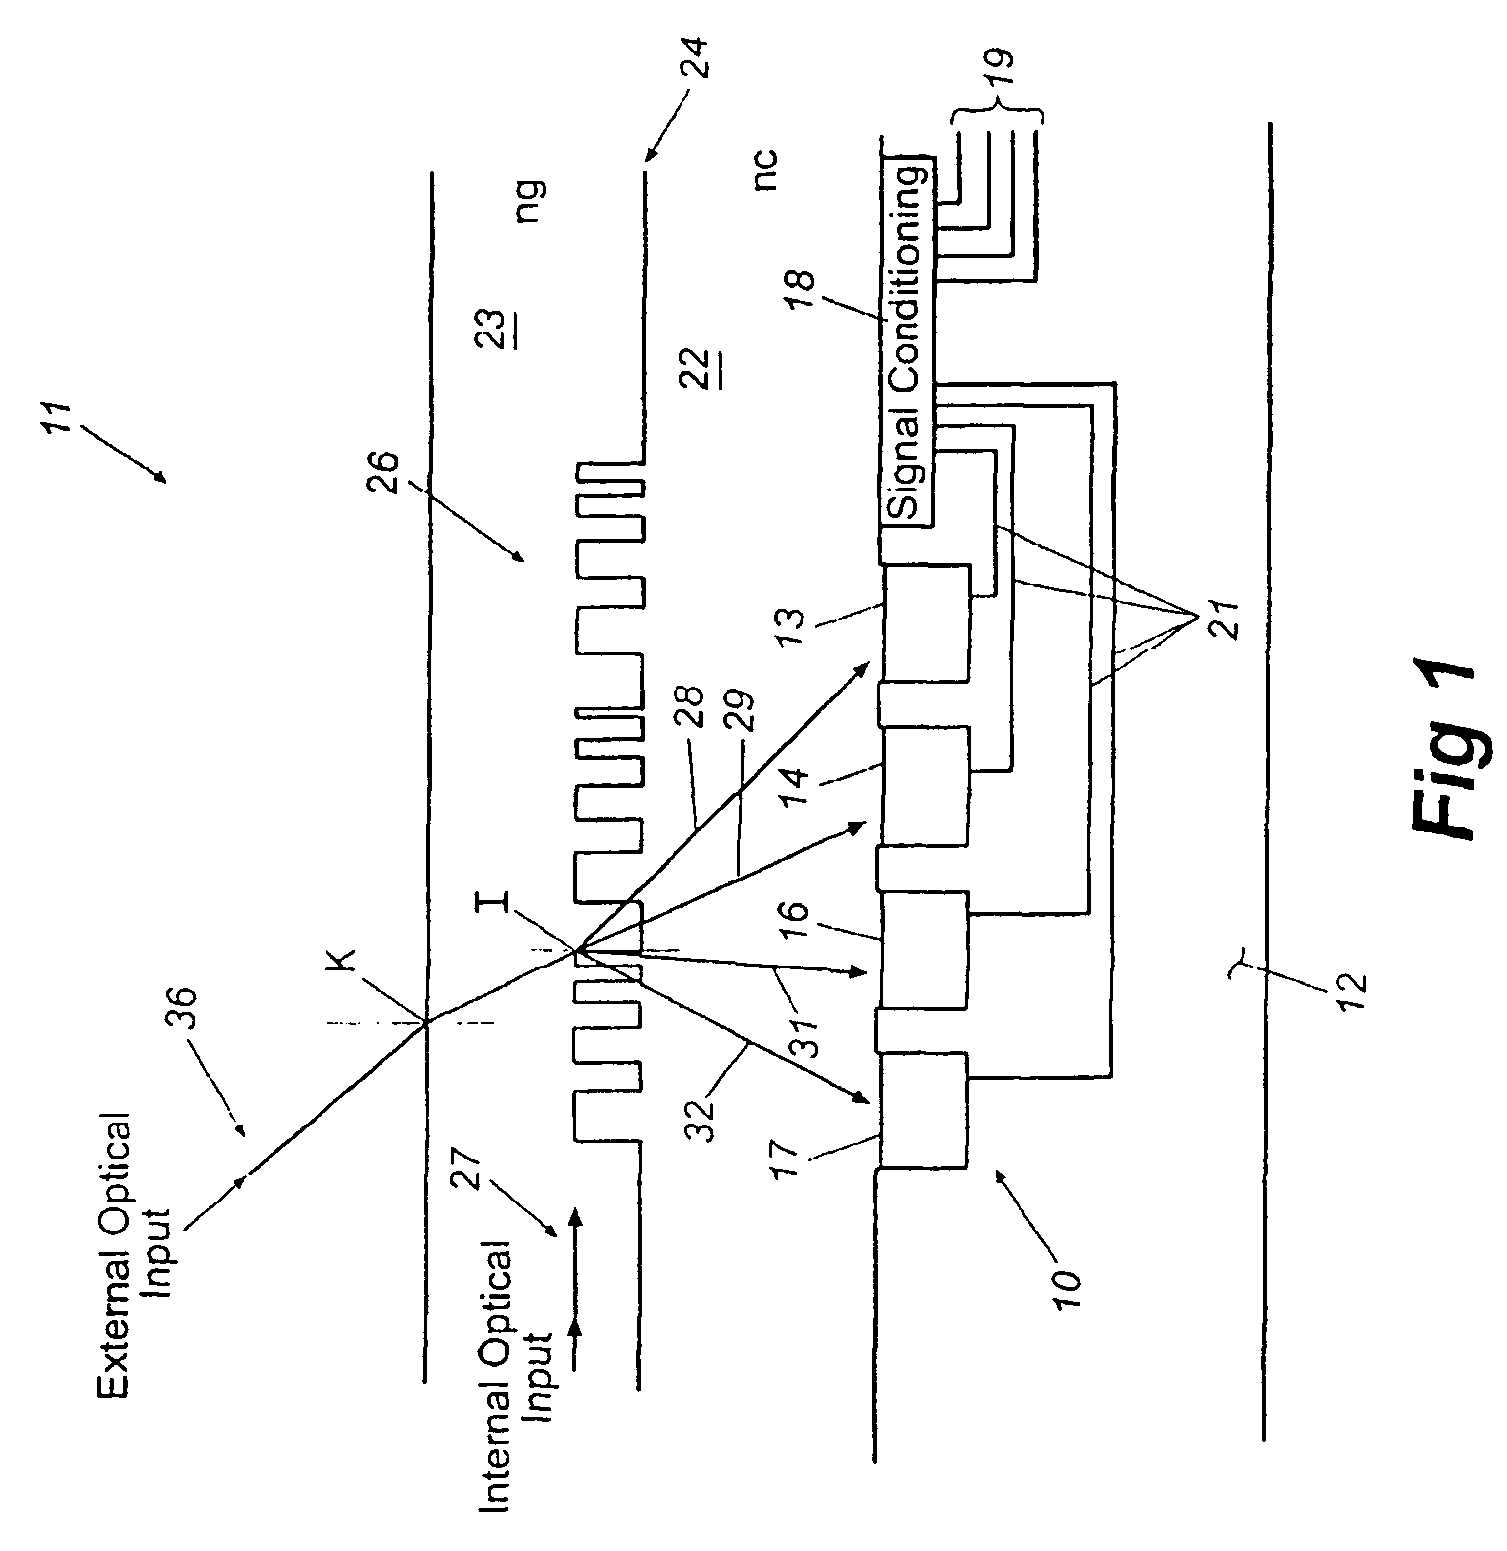 Integrated optical multiplexer and demultiplexer for wavelength division transmission of information